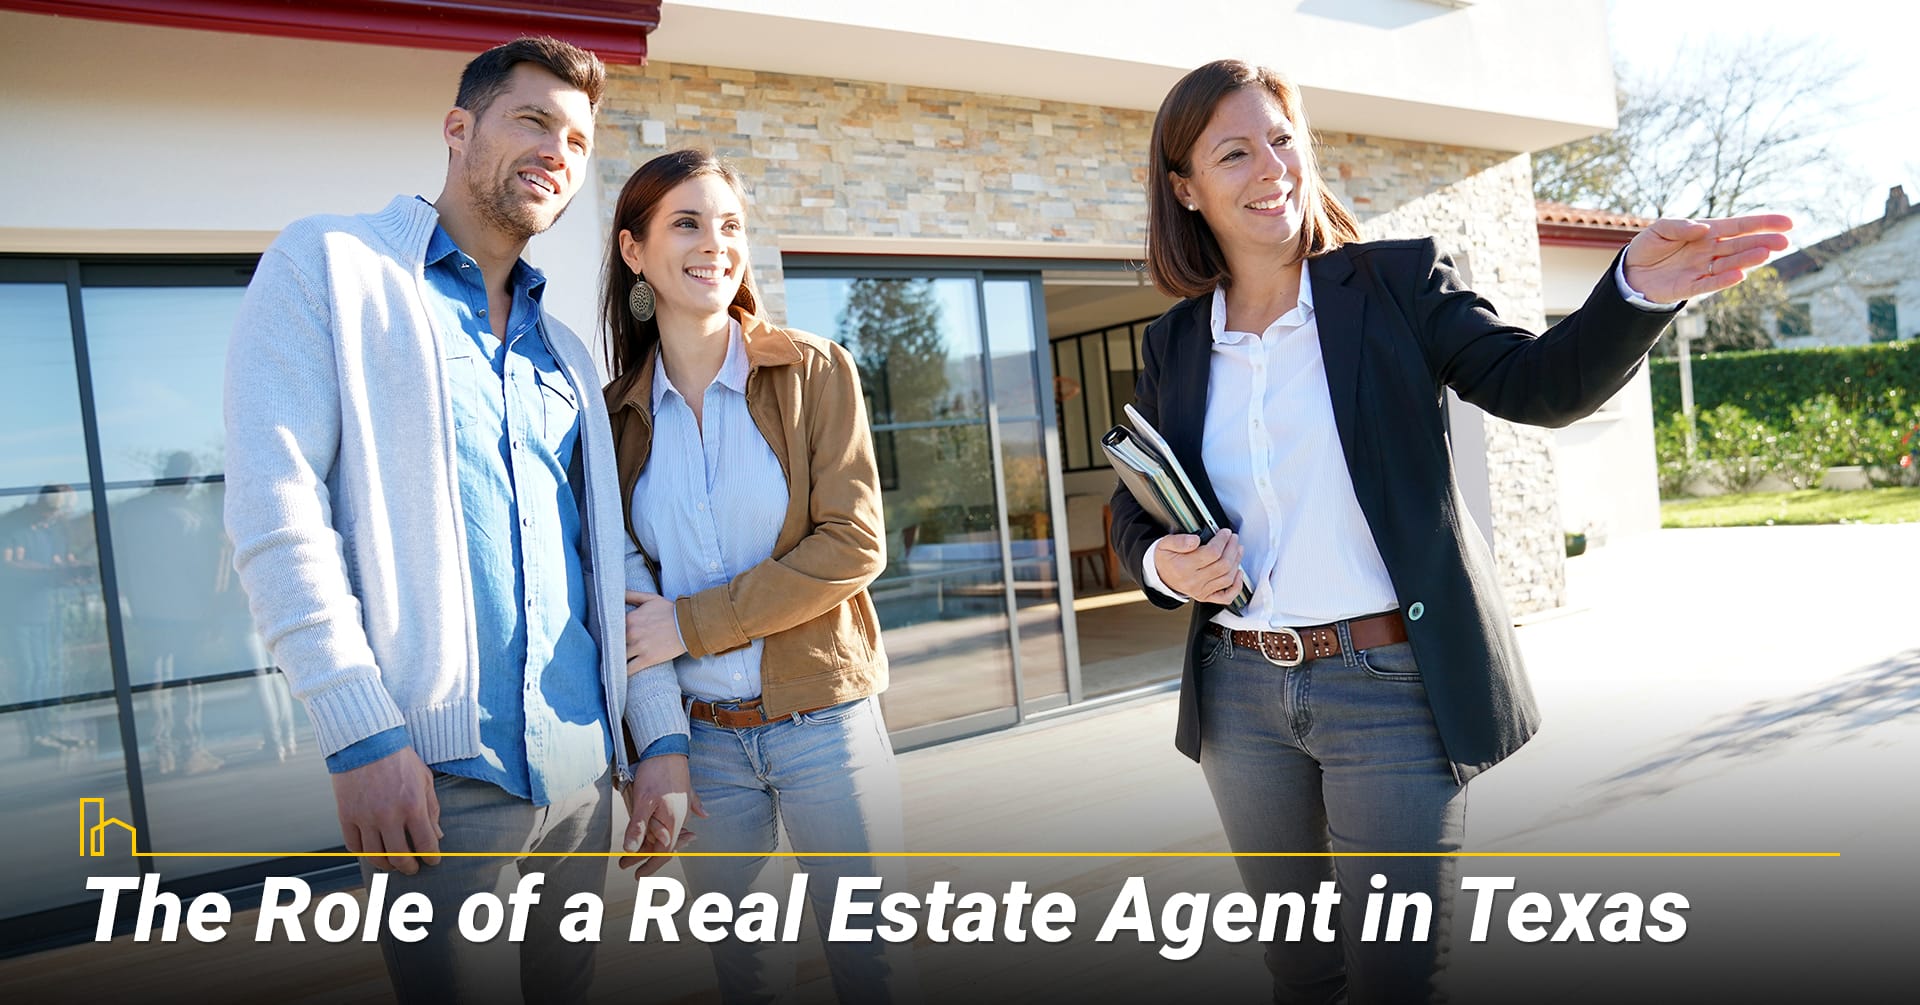 5. The Role of a Real Estate Agent in Texas